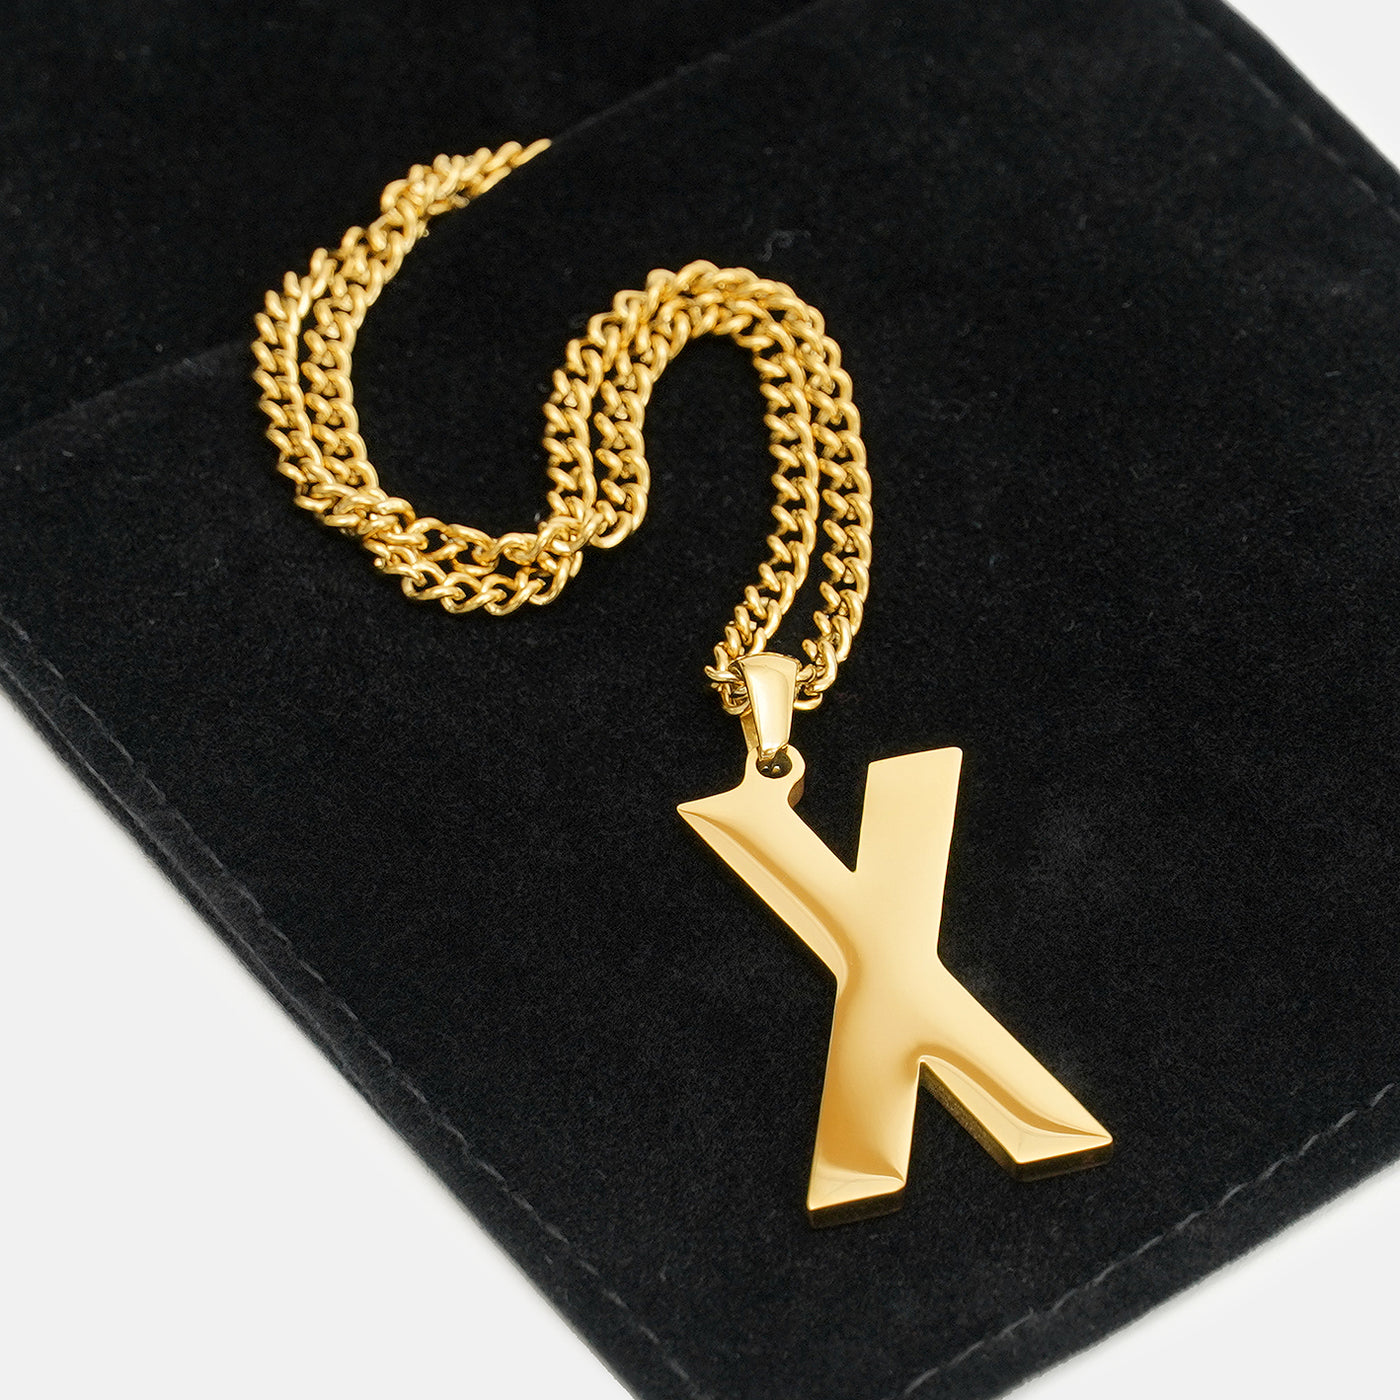 X Letter Pendant with Chain Necklace - Gold Plated Stainless Steel